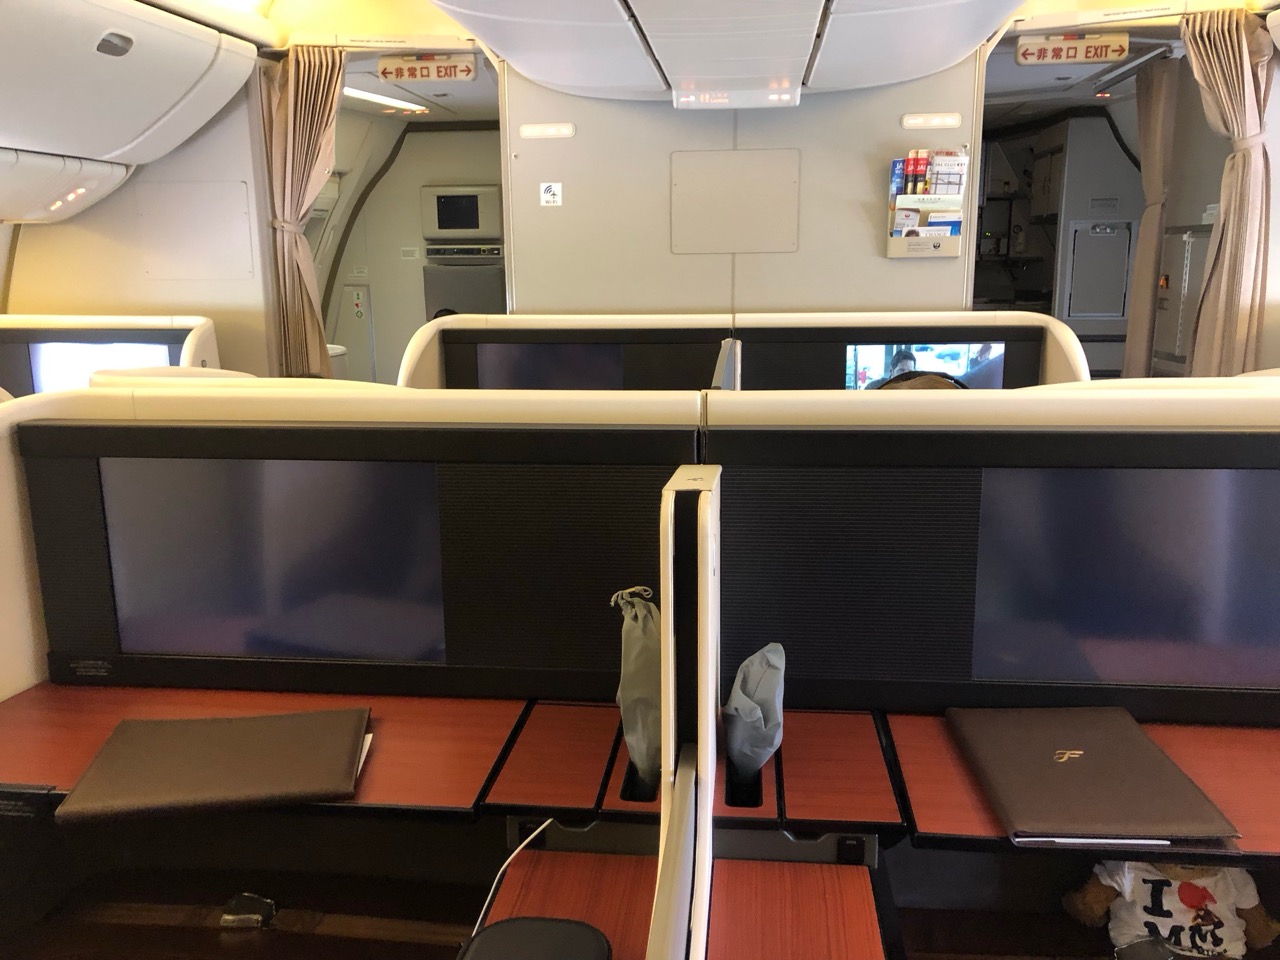 a desks and chairs in an airplane